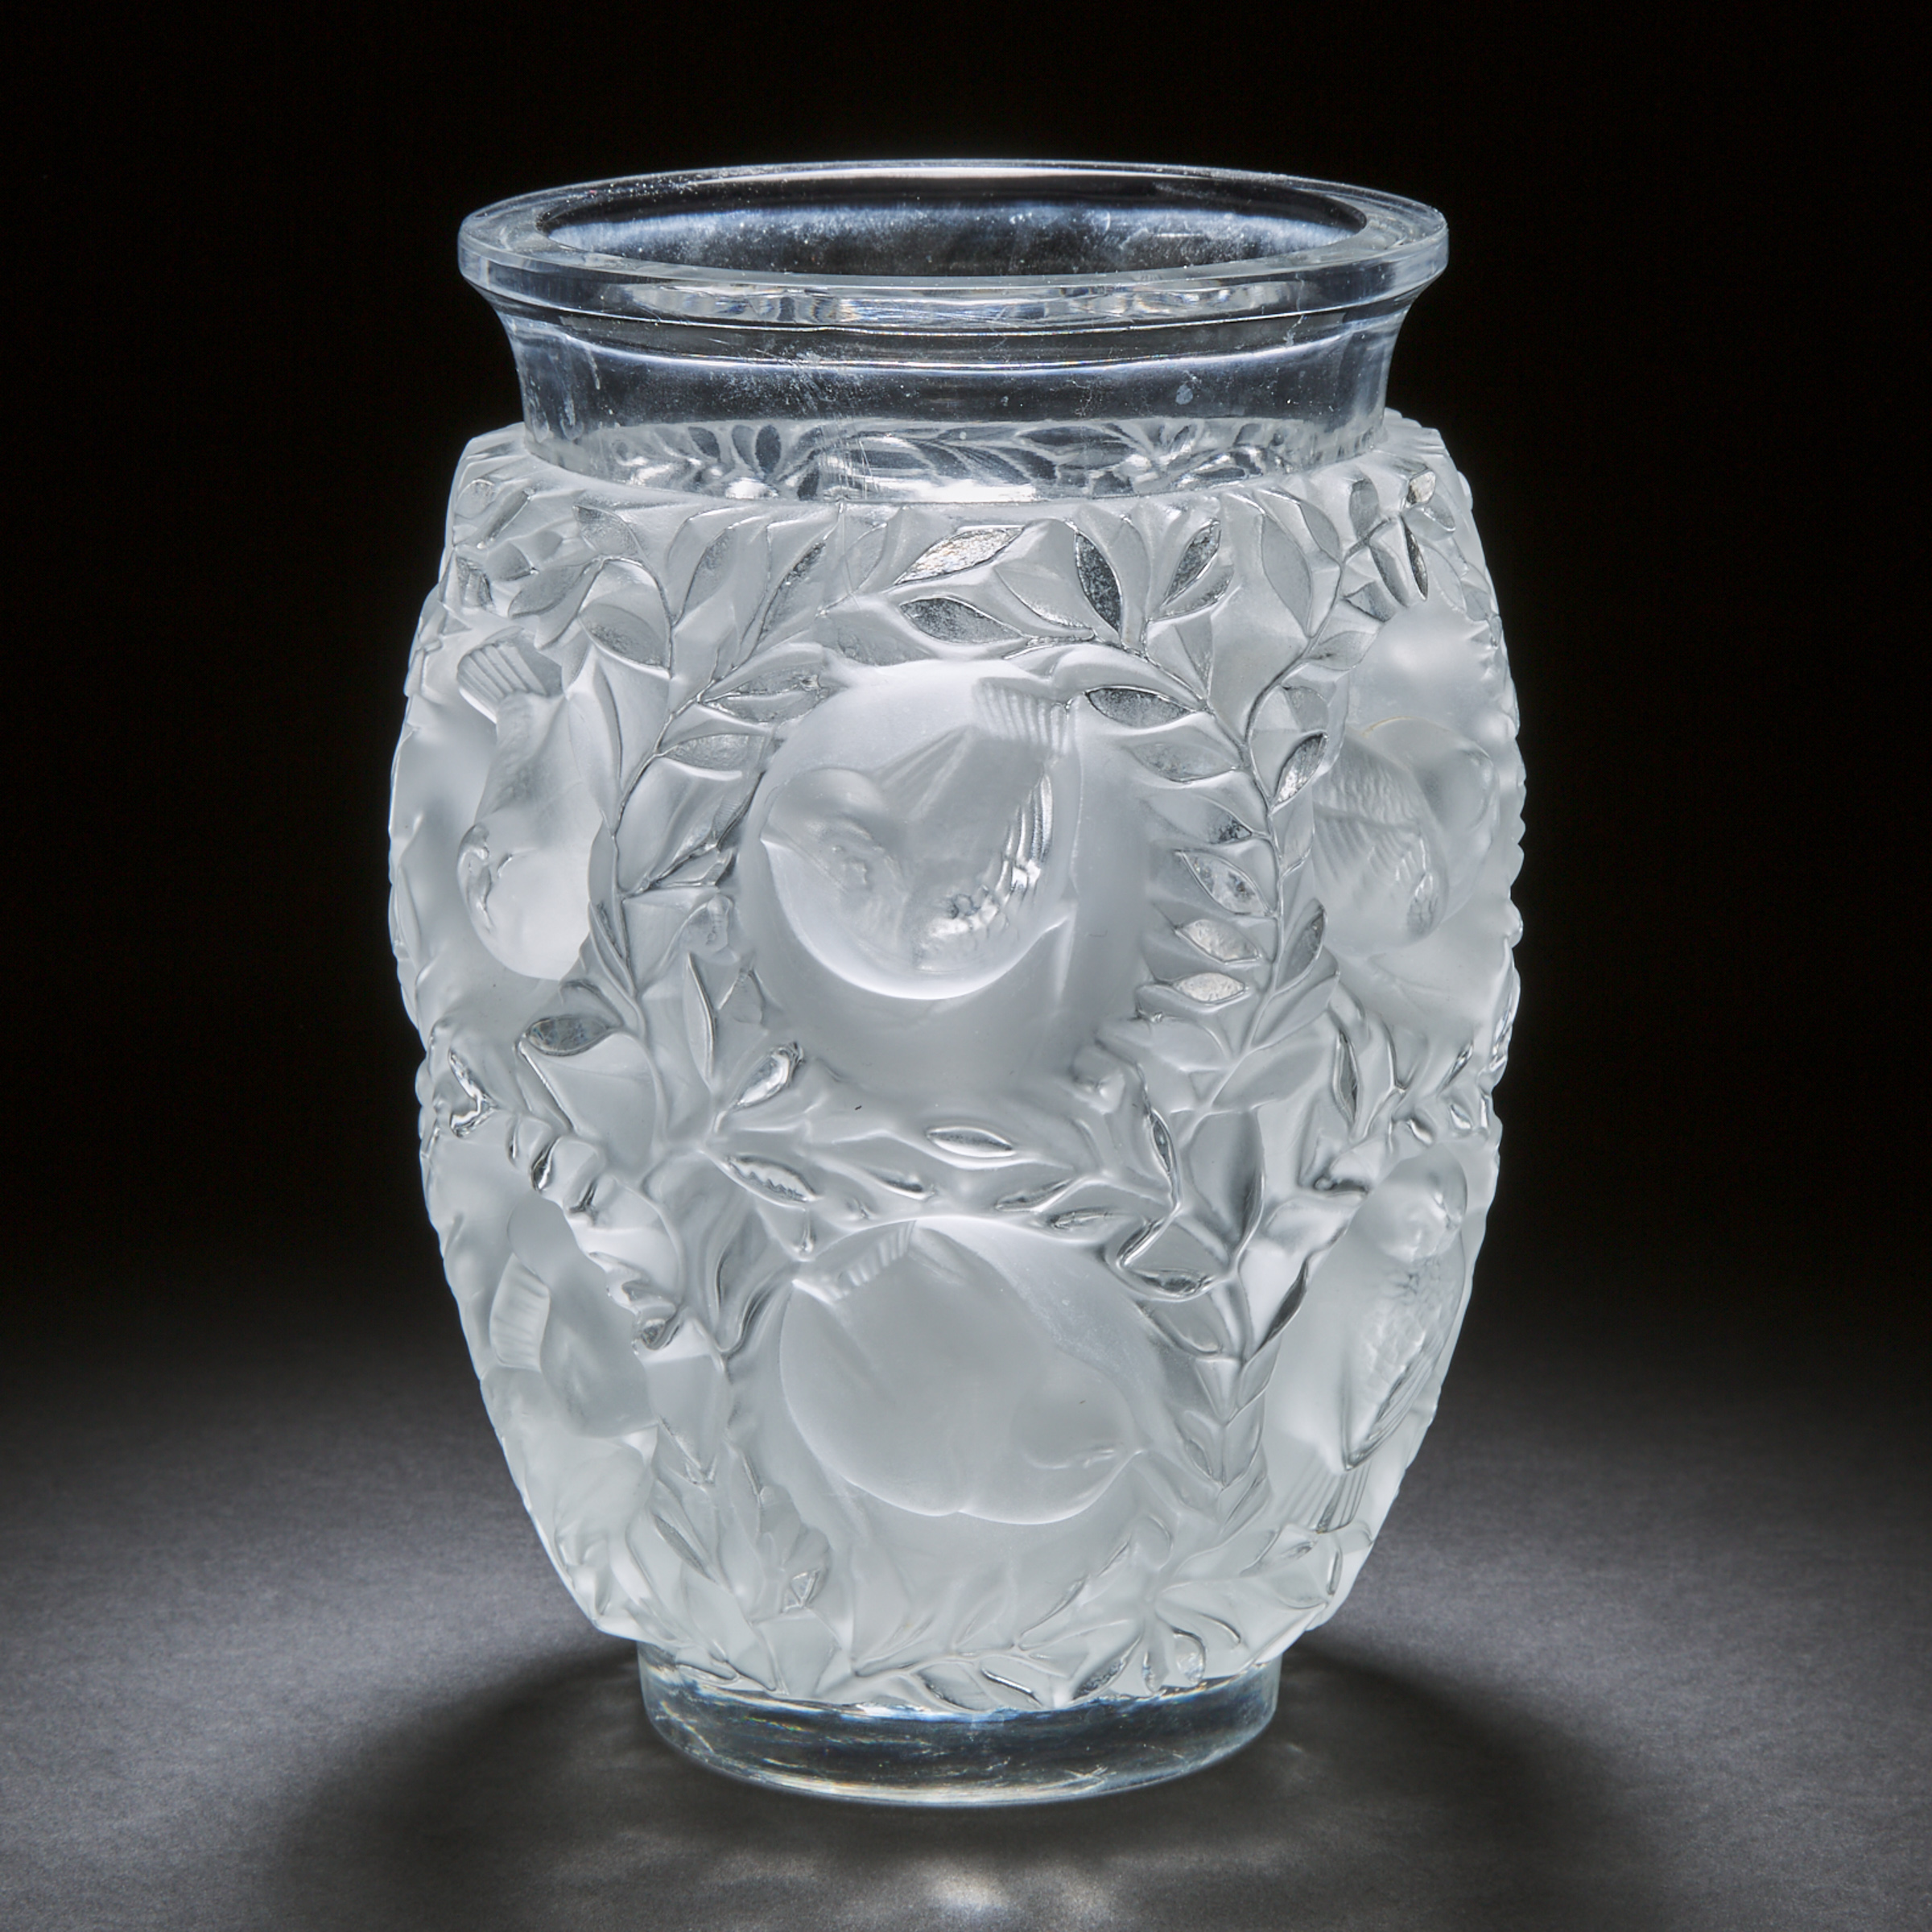 'Bagatelle', Lalique Moulded and Partly Frosted Glass Vase, post-1945